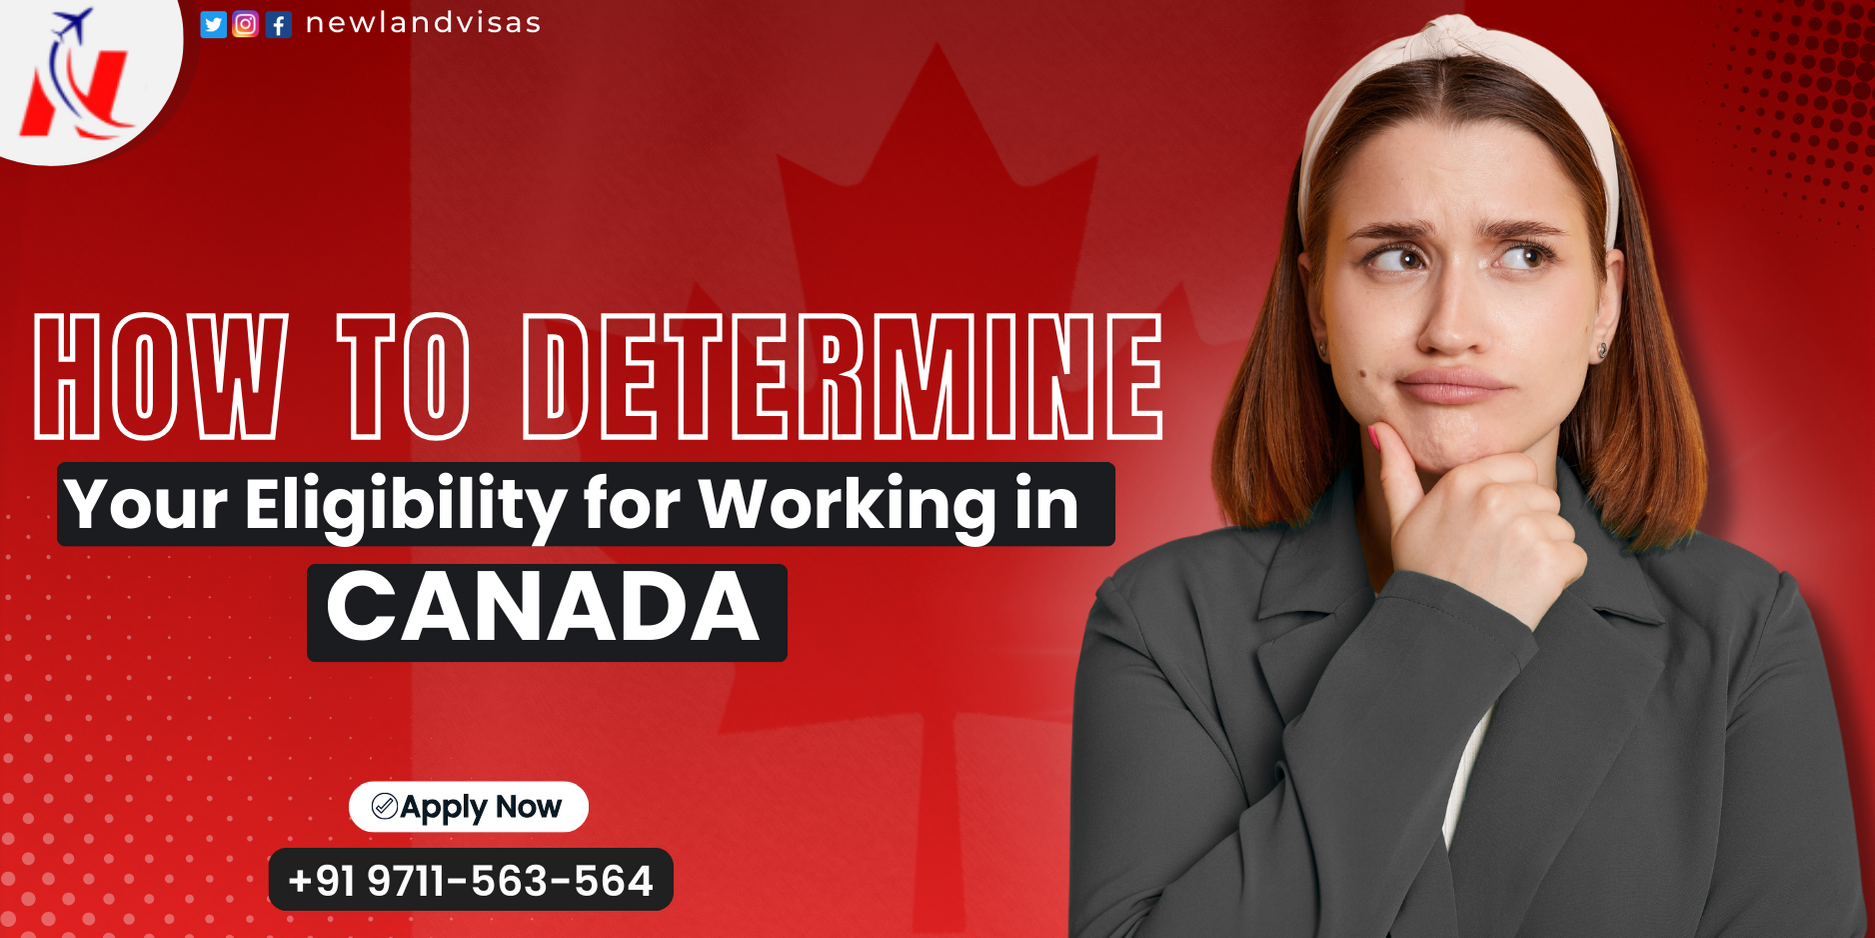 How to Determine Your Eligibility for Working in Canada